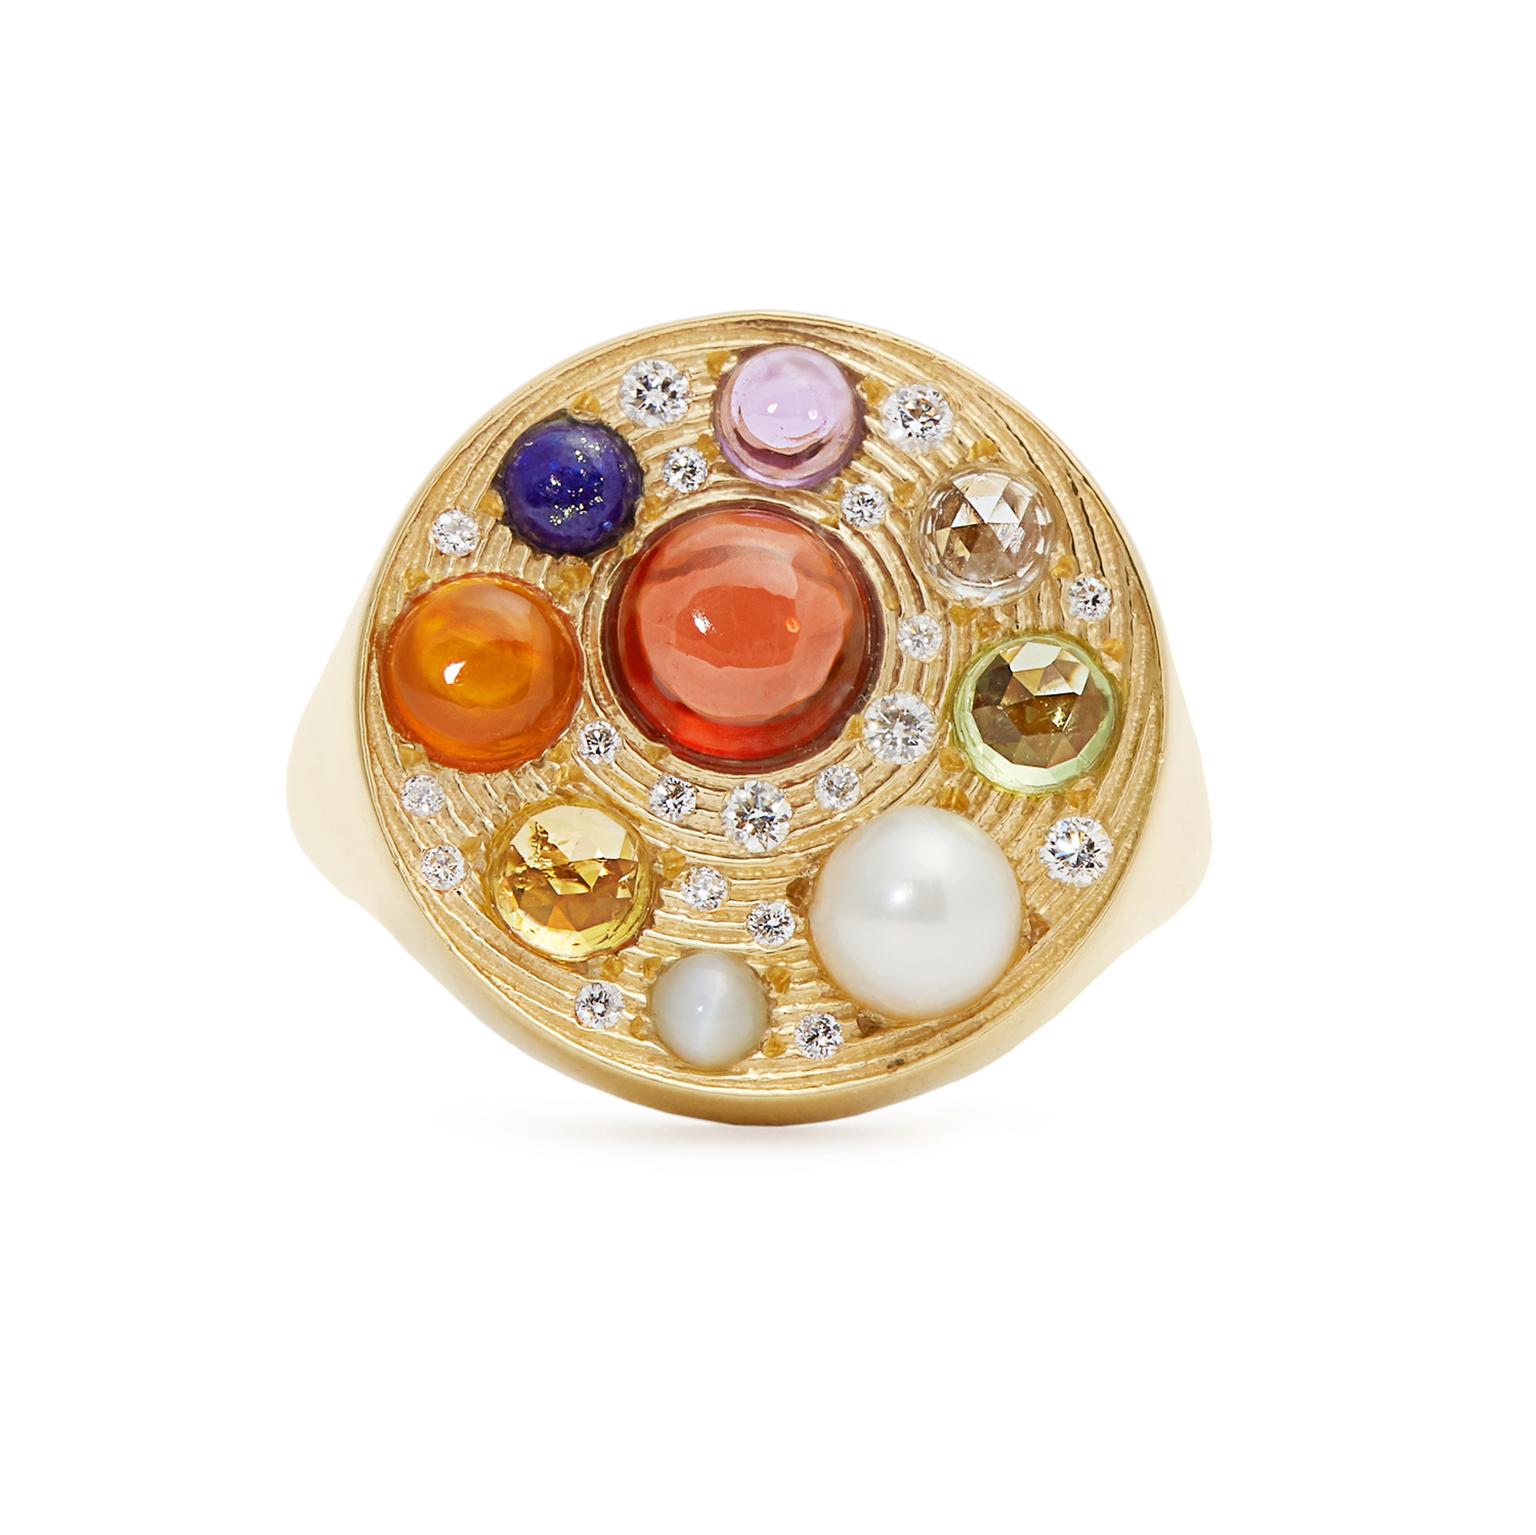 Noor Fares gold and gemstone signet ring